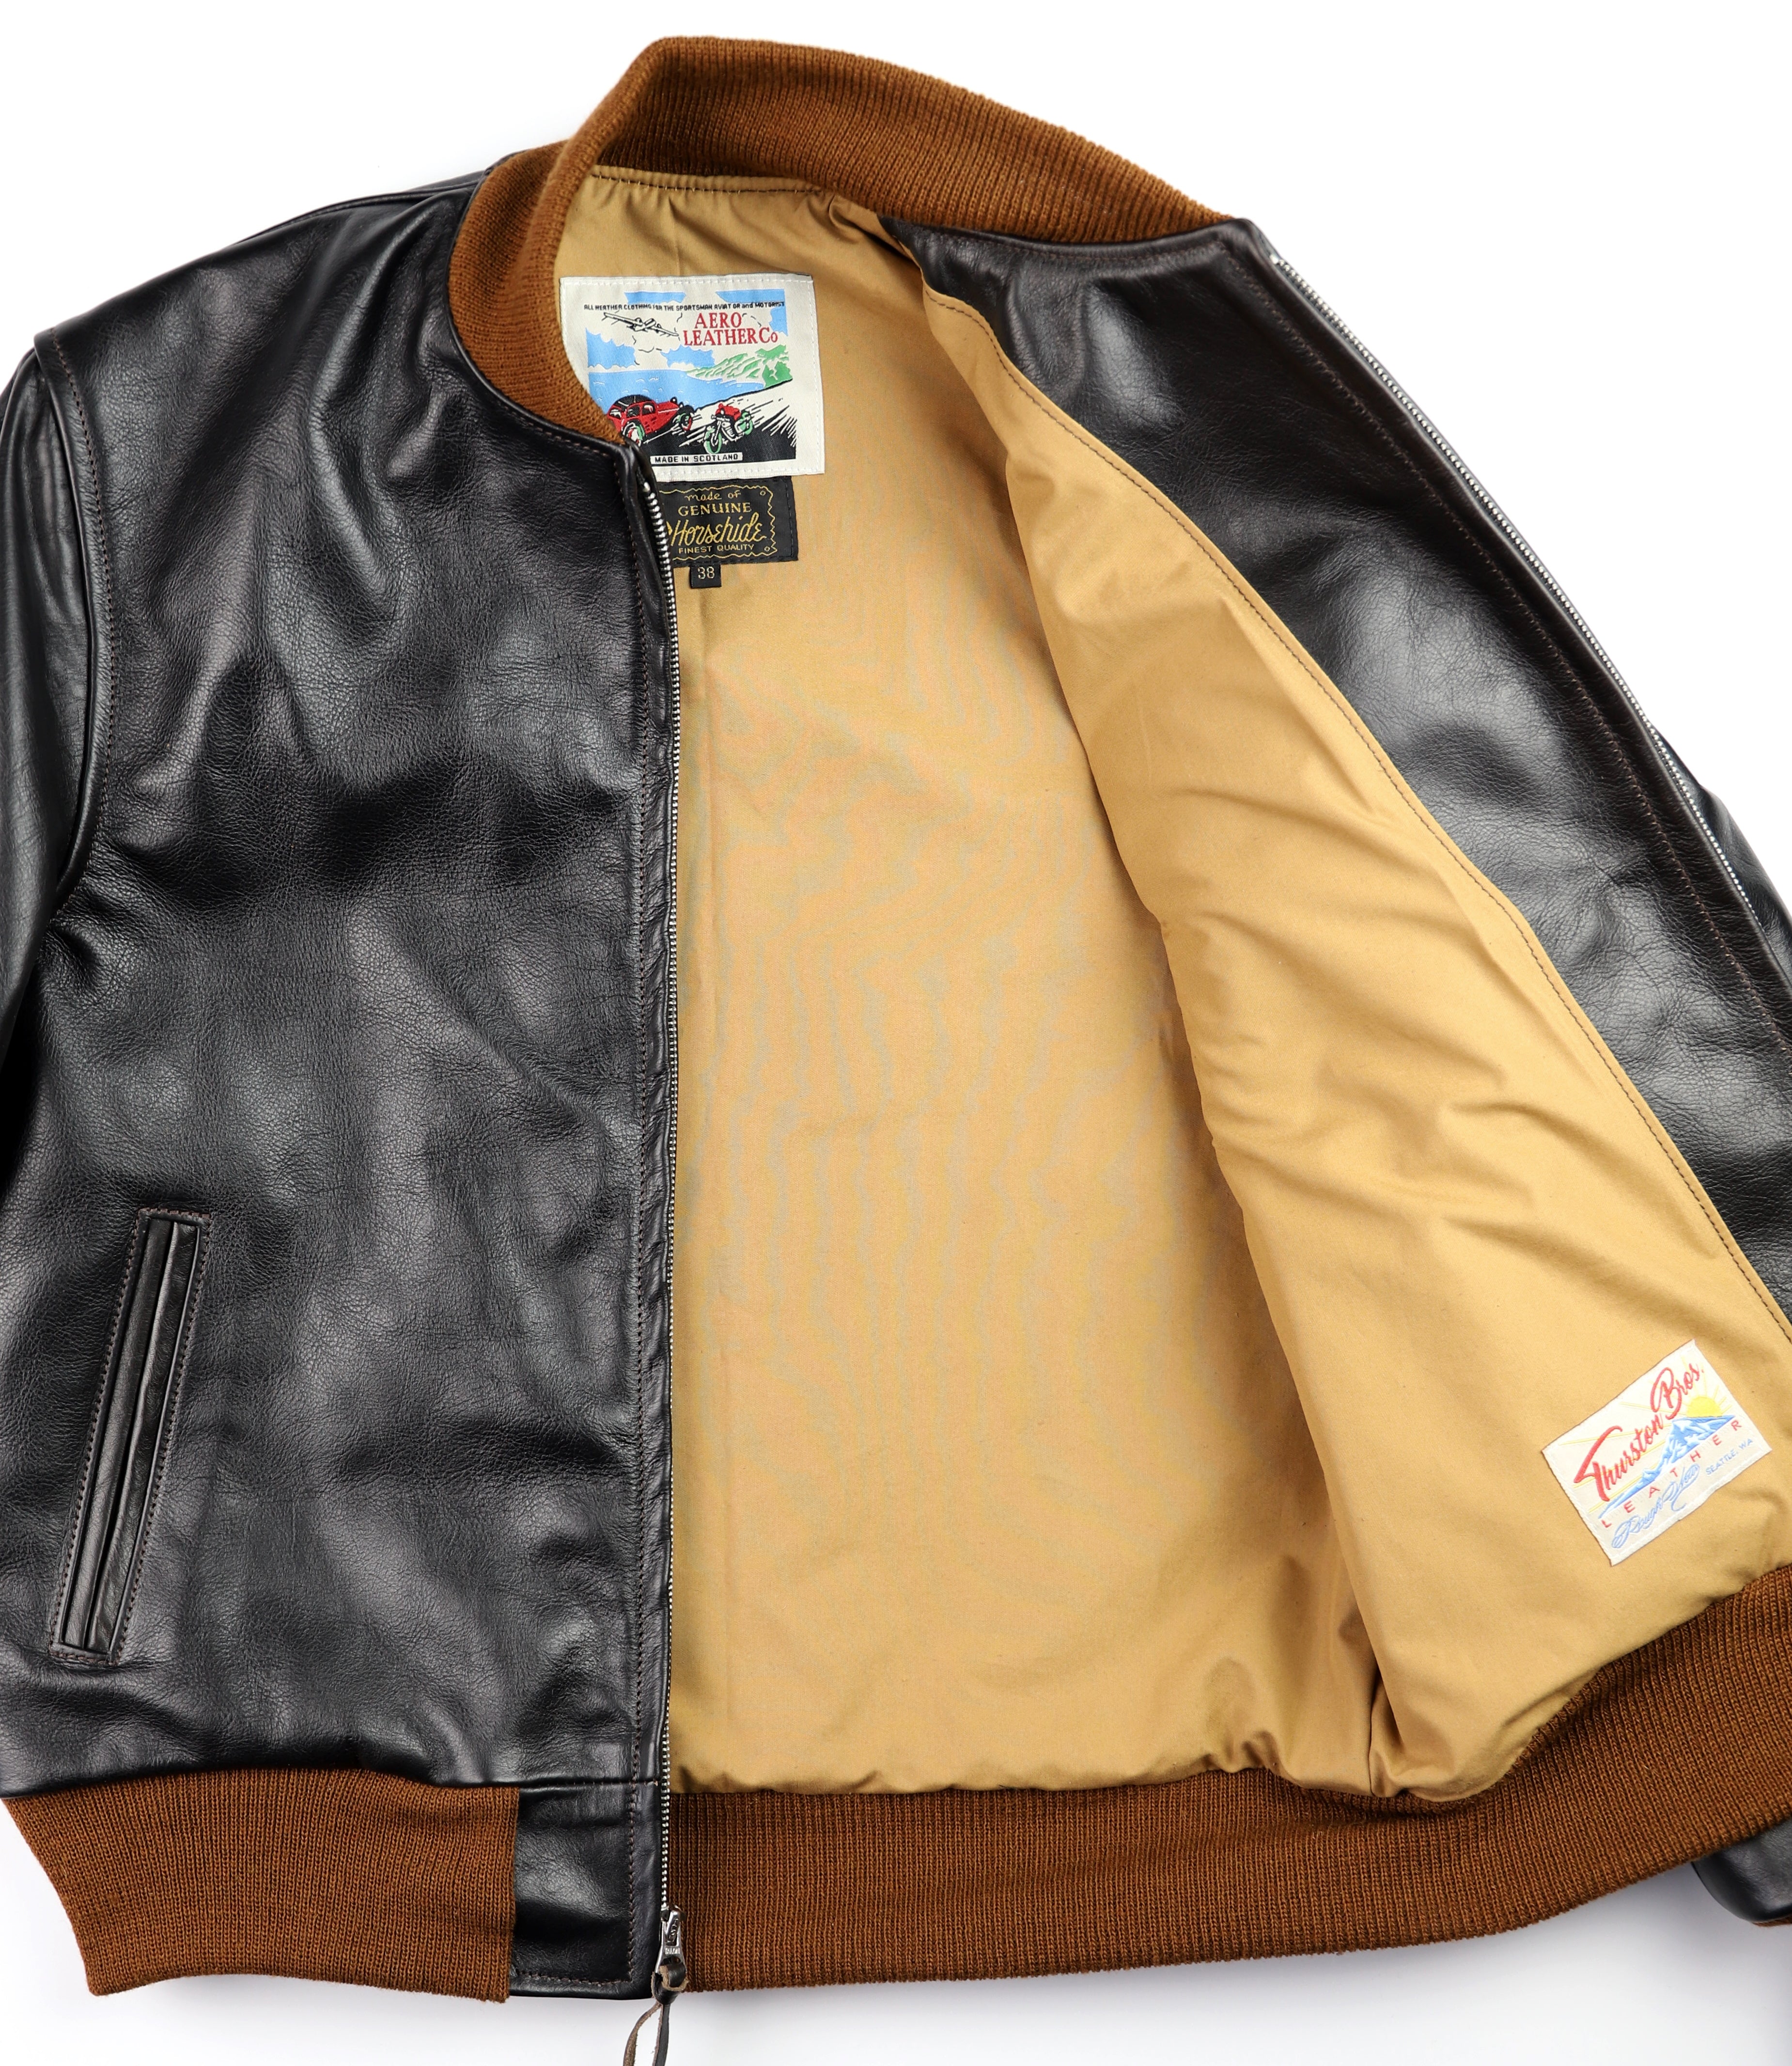 Aero College Jacket, size 38 (fits like 40), Blackened Brown Vicenza Horsehide